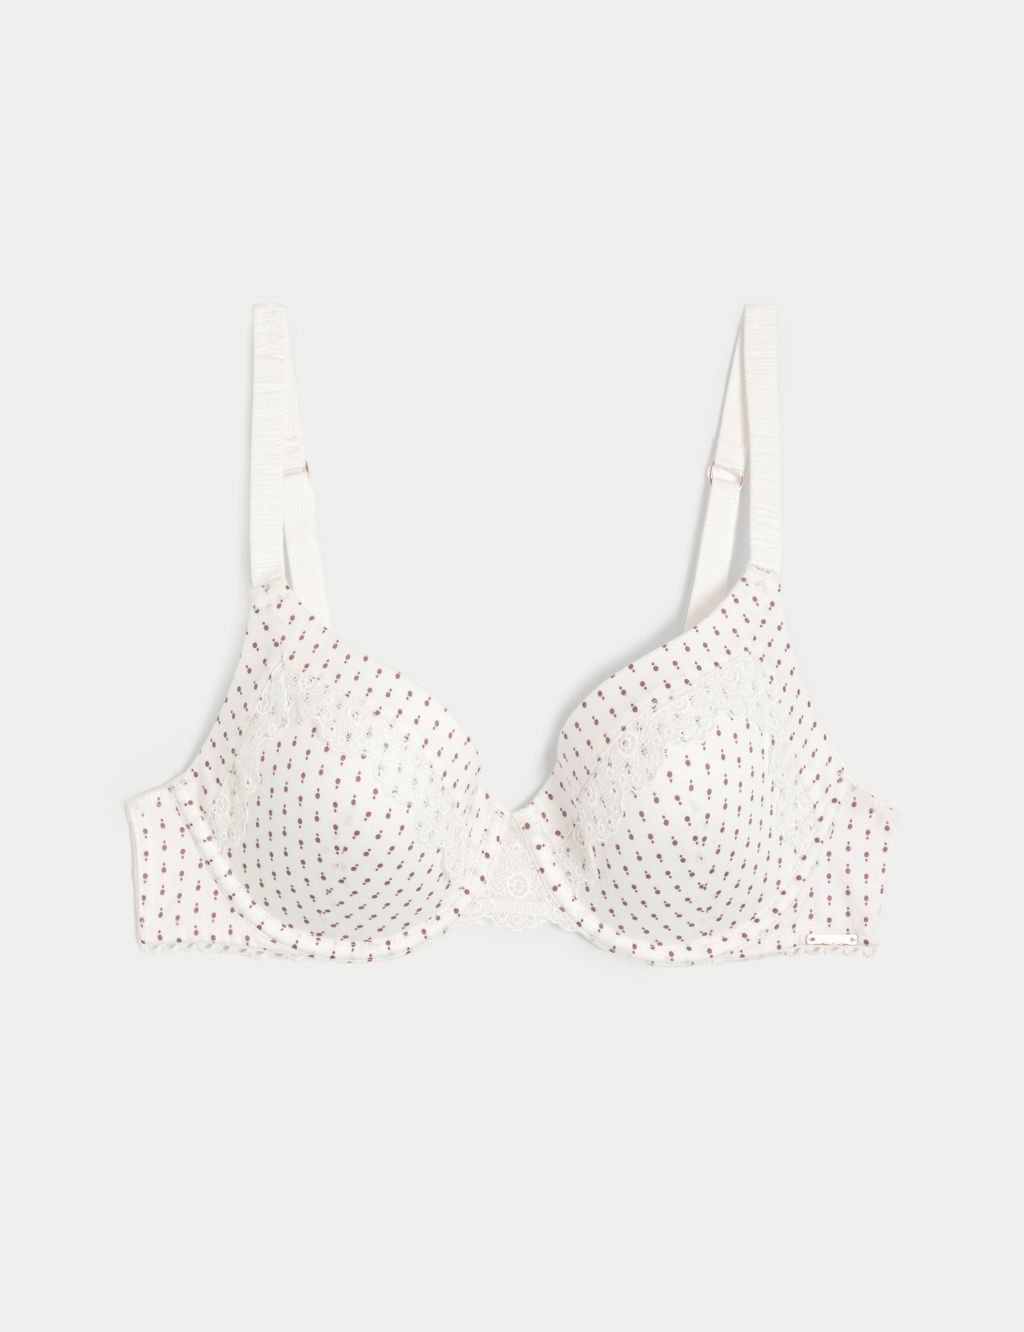 Ammi Wired Full Cup Bra With Cotton A-E image 1